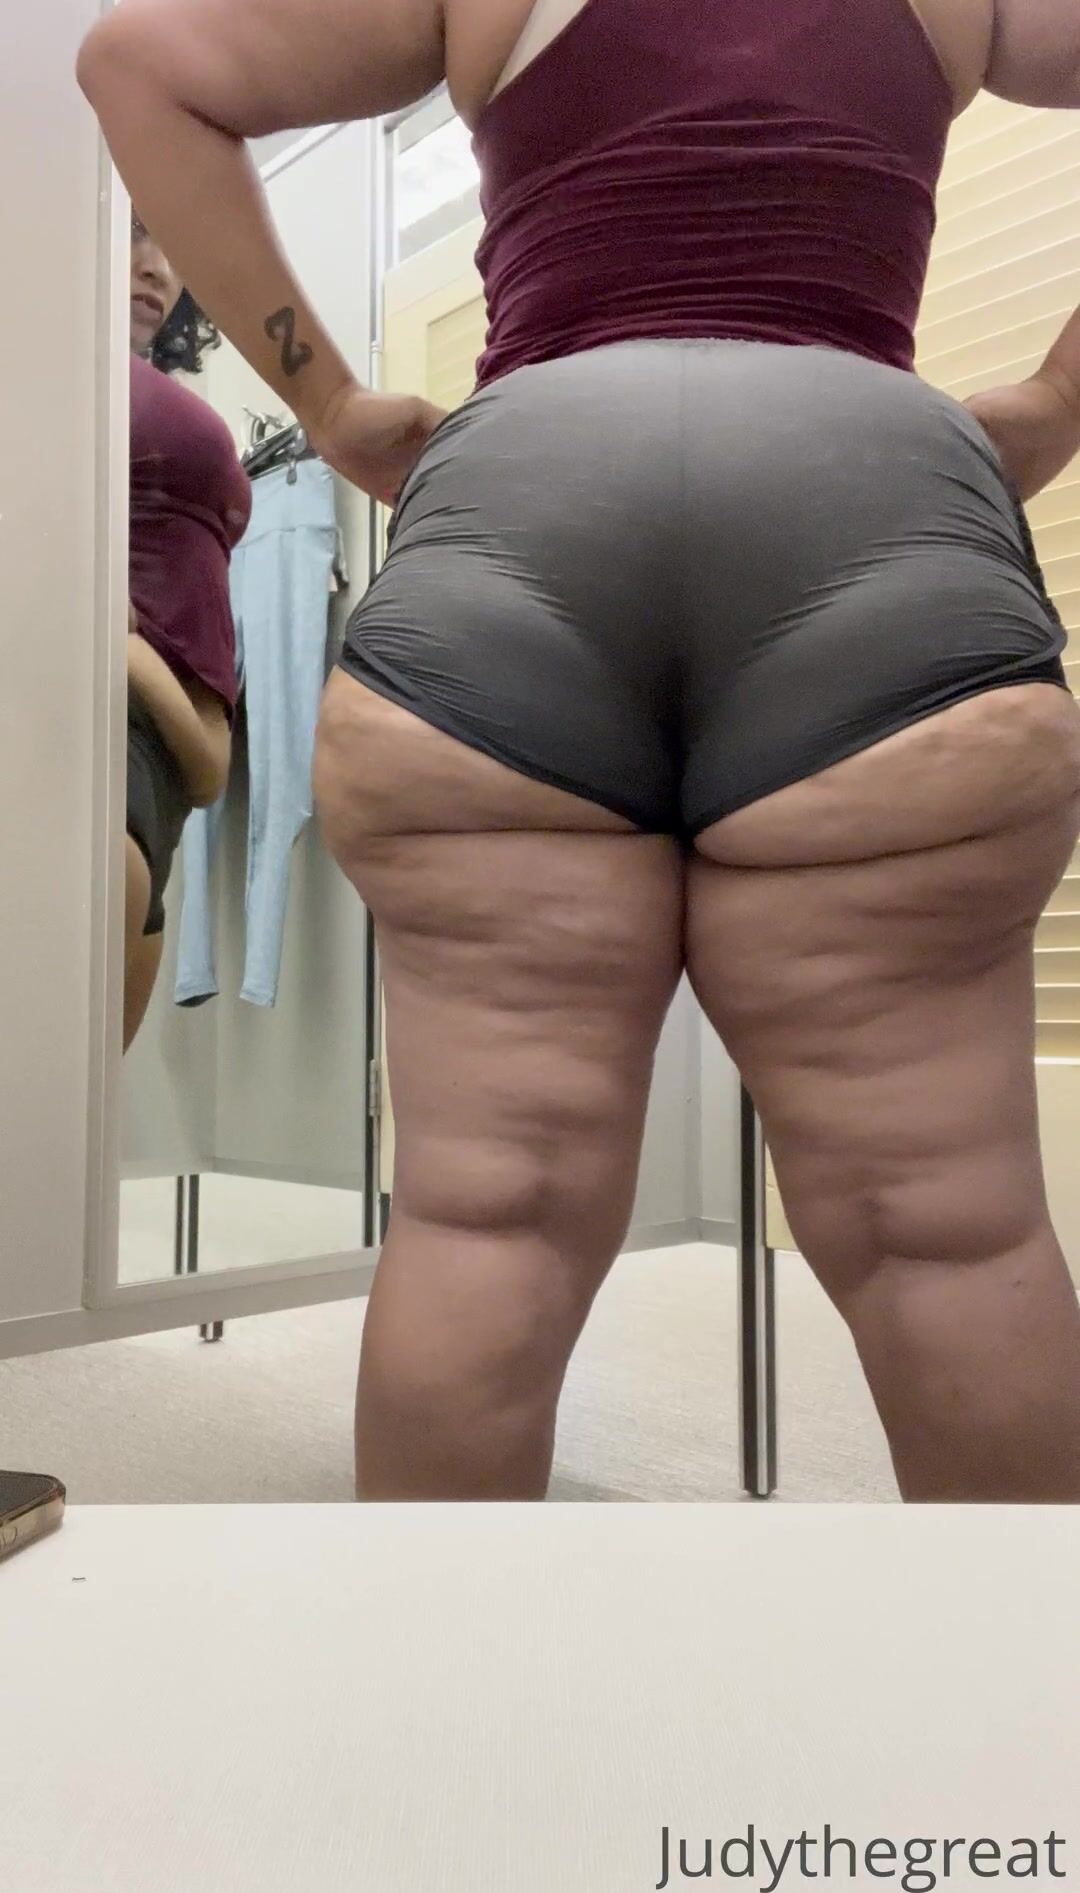 Judy the great fitting room